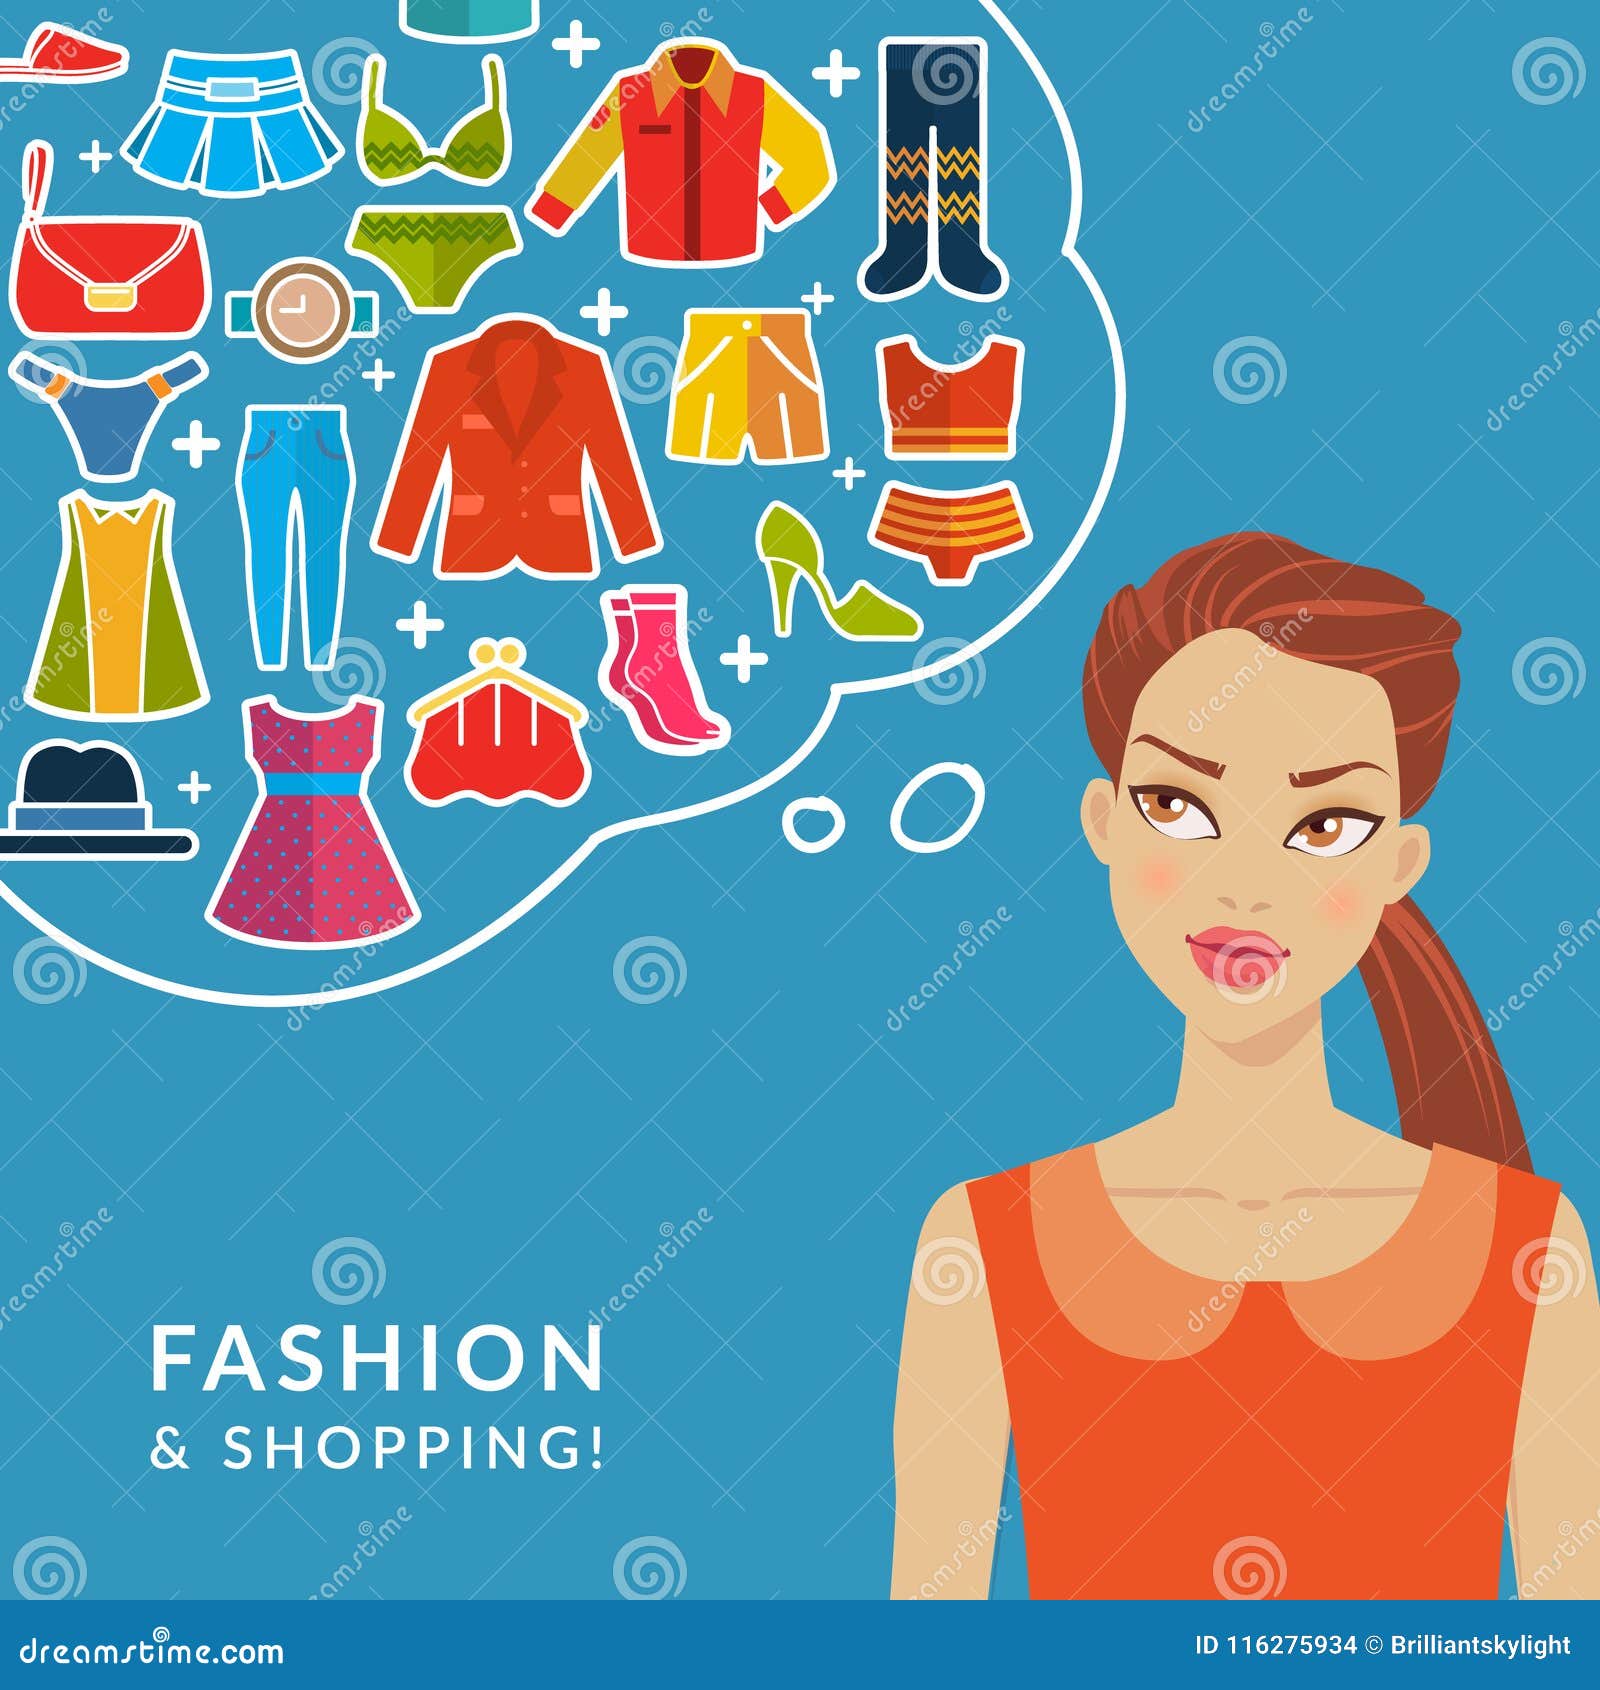 Fashion and shopping stock vector. Illustration of graphic - 116275934